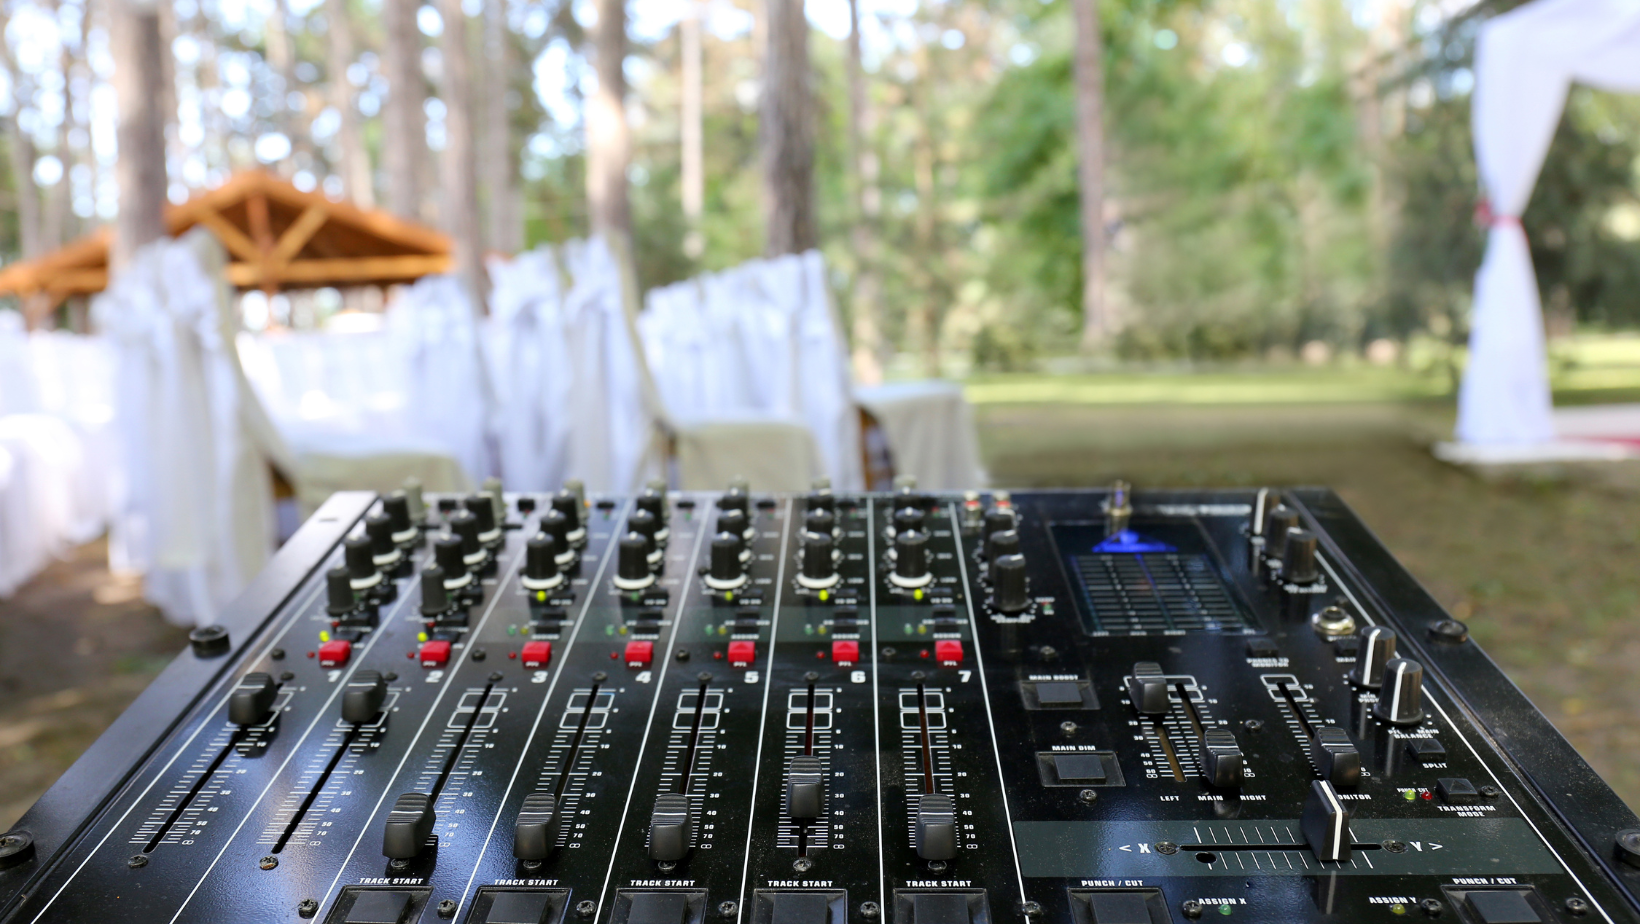 A wedding DJ's sound board at an outdoor wedding venue in the Vermont woods.